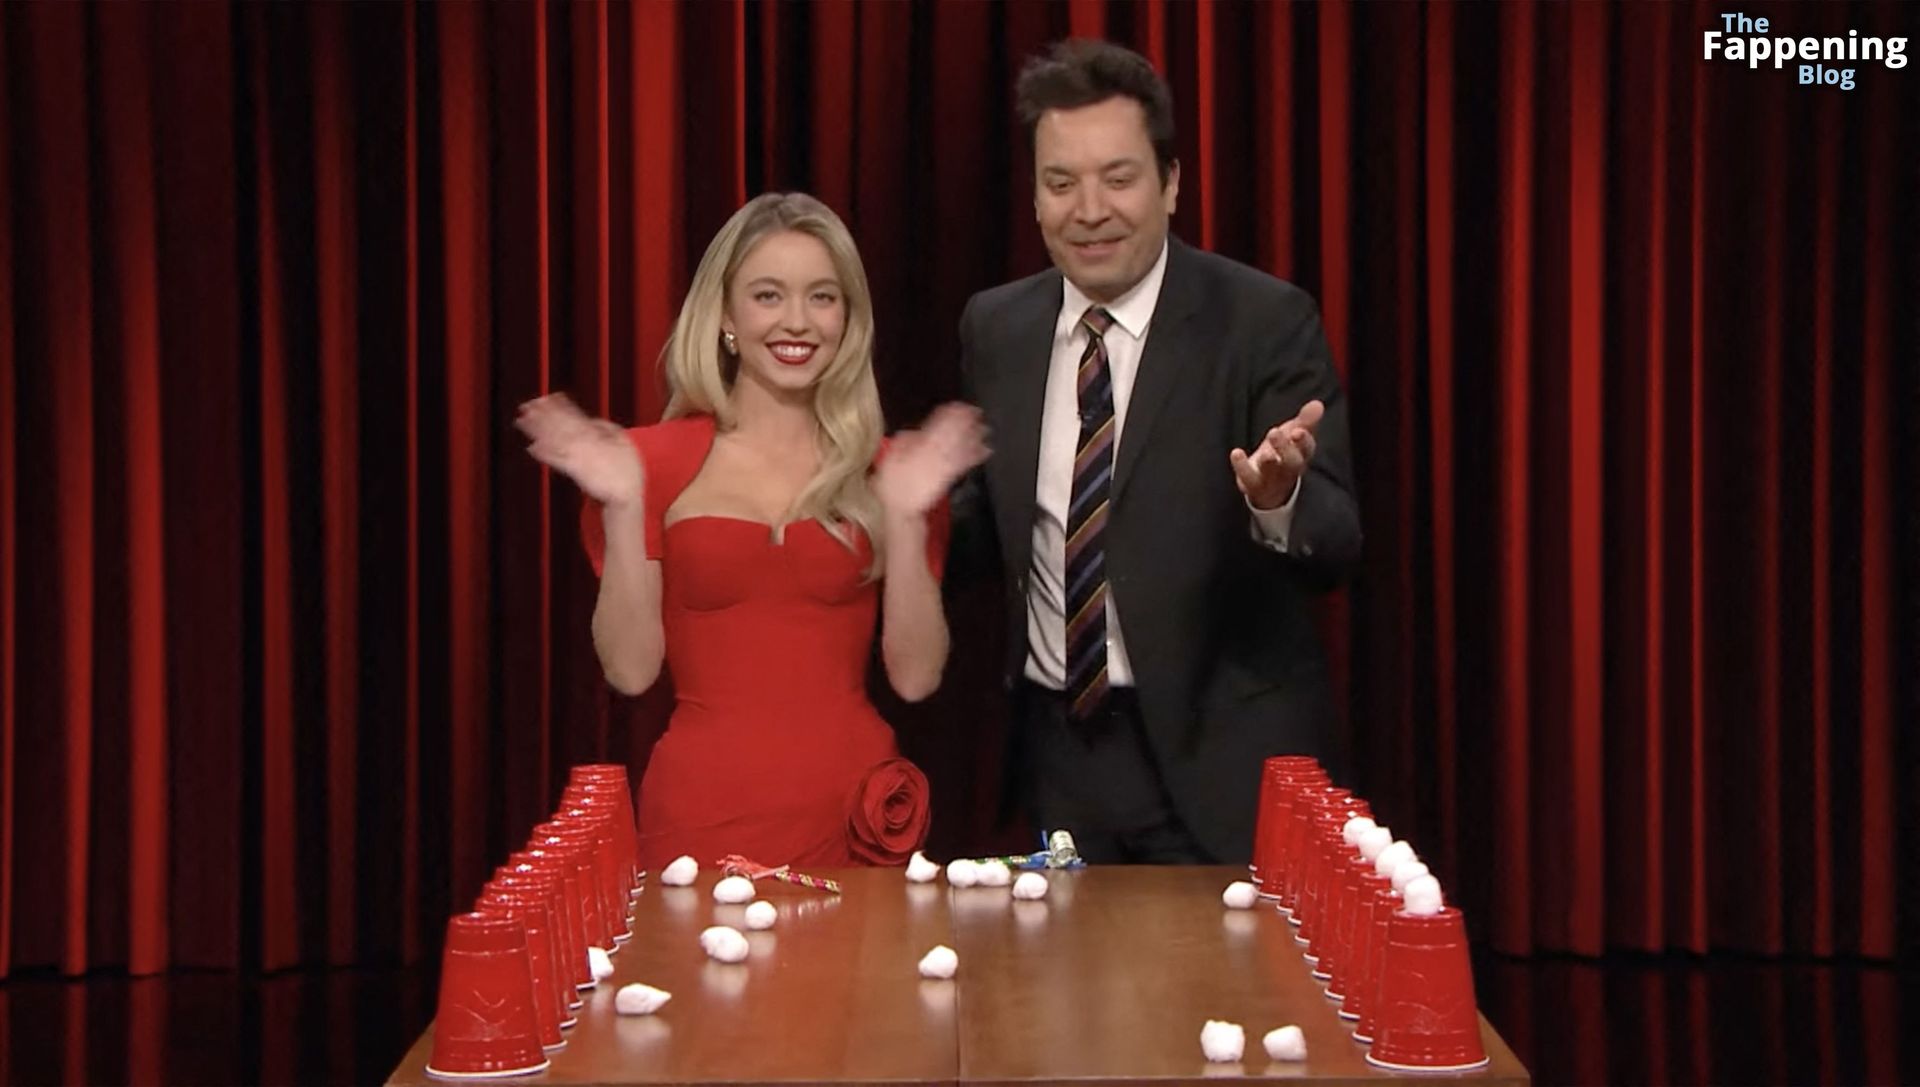 Sydney Sweeney Looks Stunning in a Red Dress on Tonight’s Show (91 Photos)